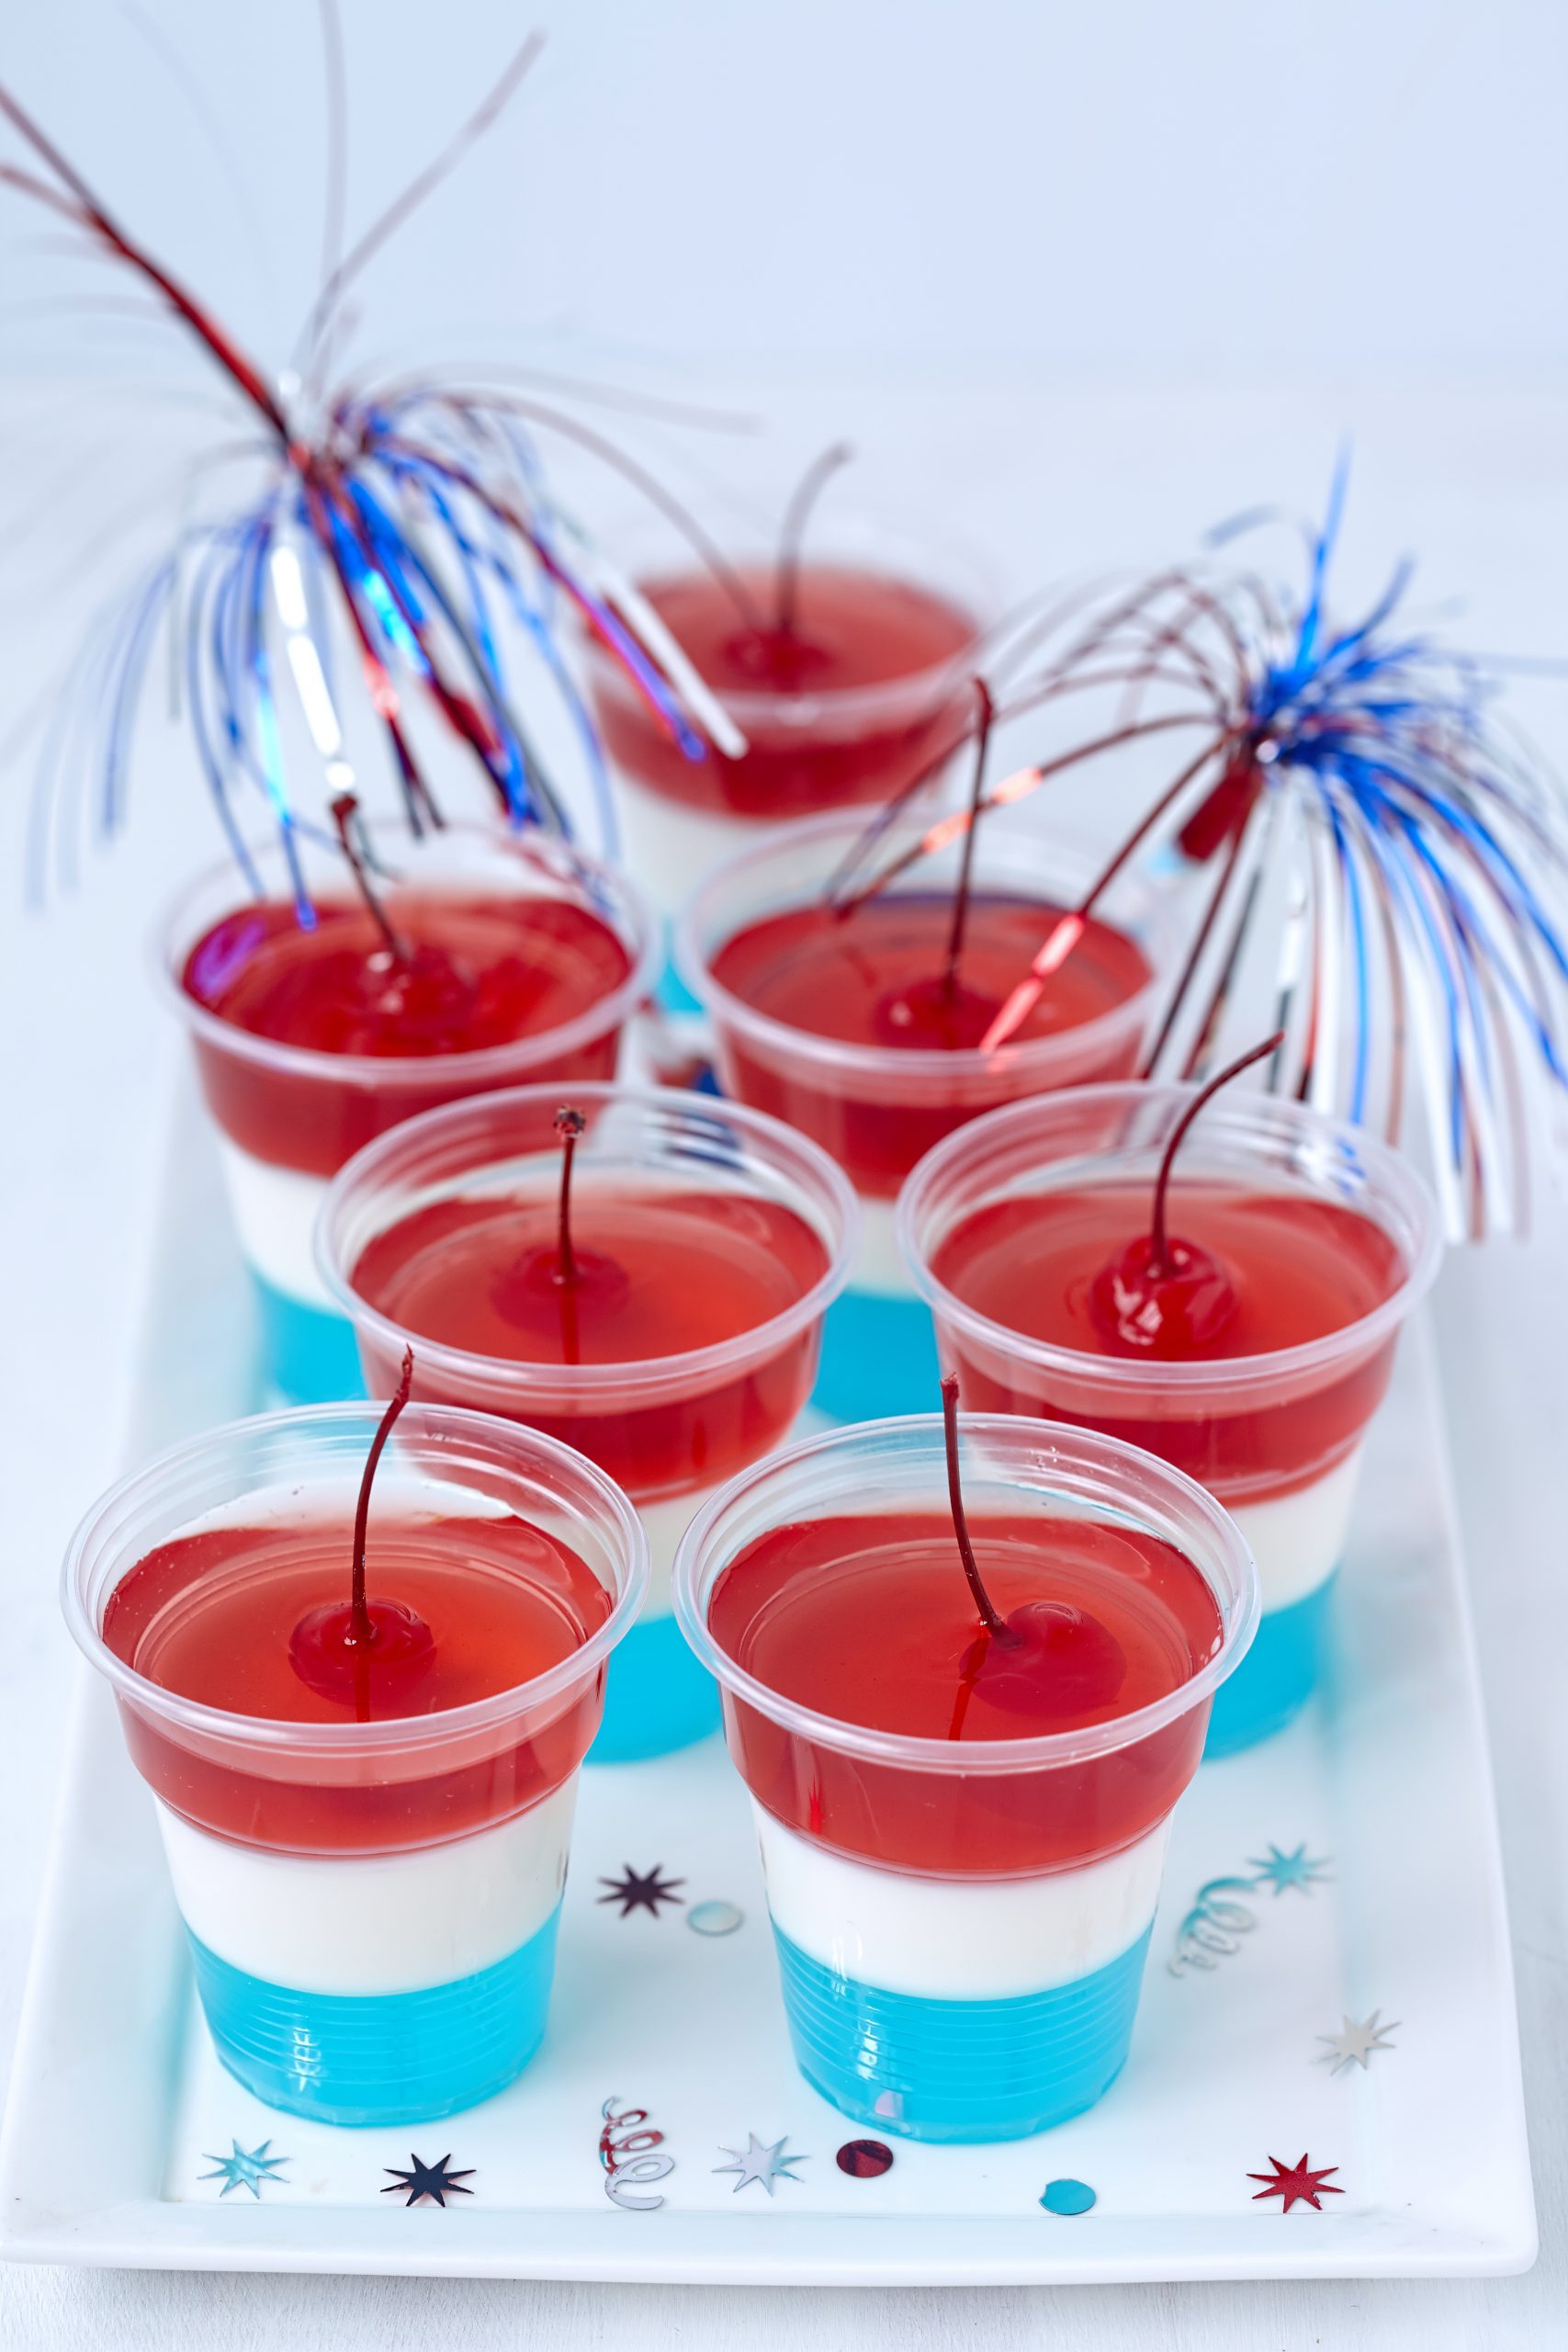 Red, White, and Blue Jello Shots Recipe - Our WabiSabi Life